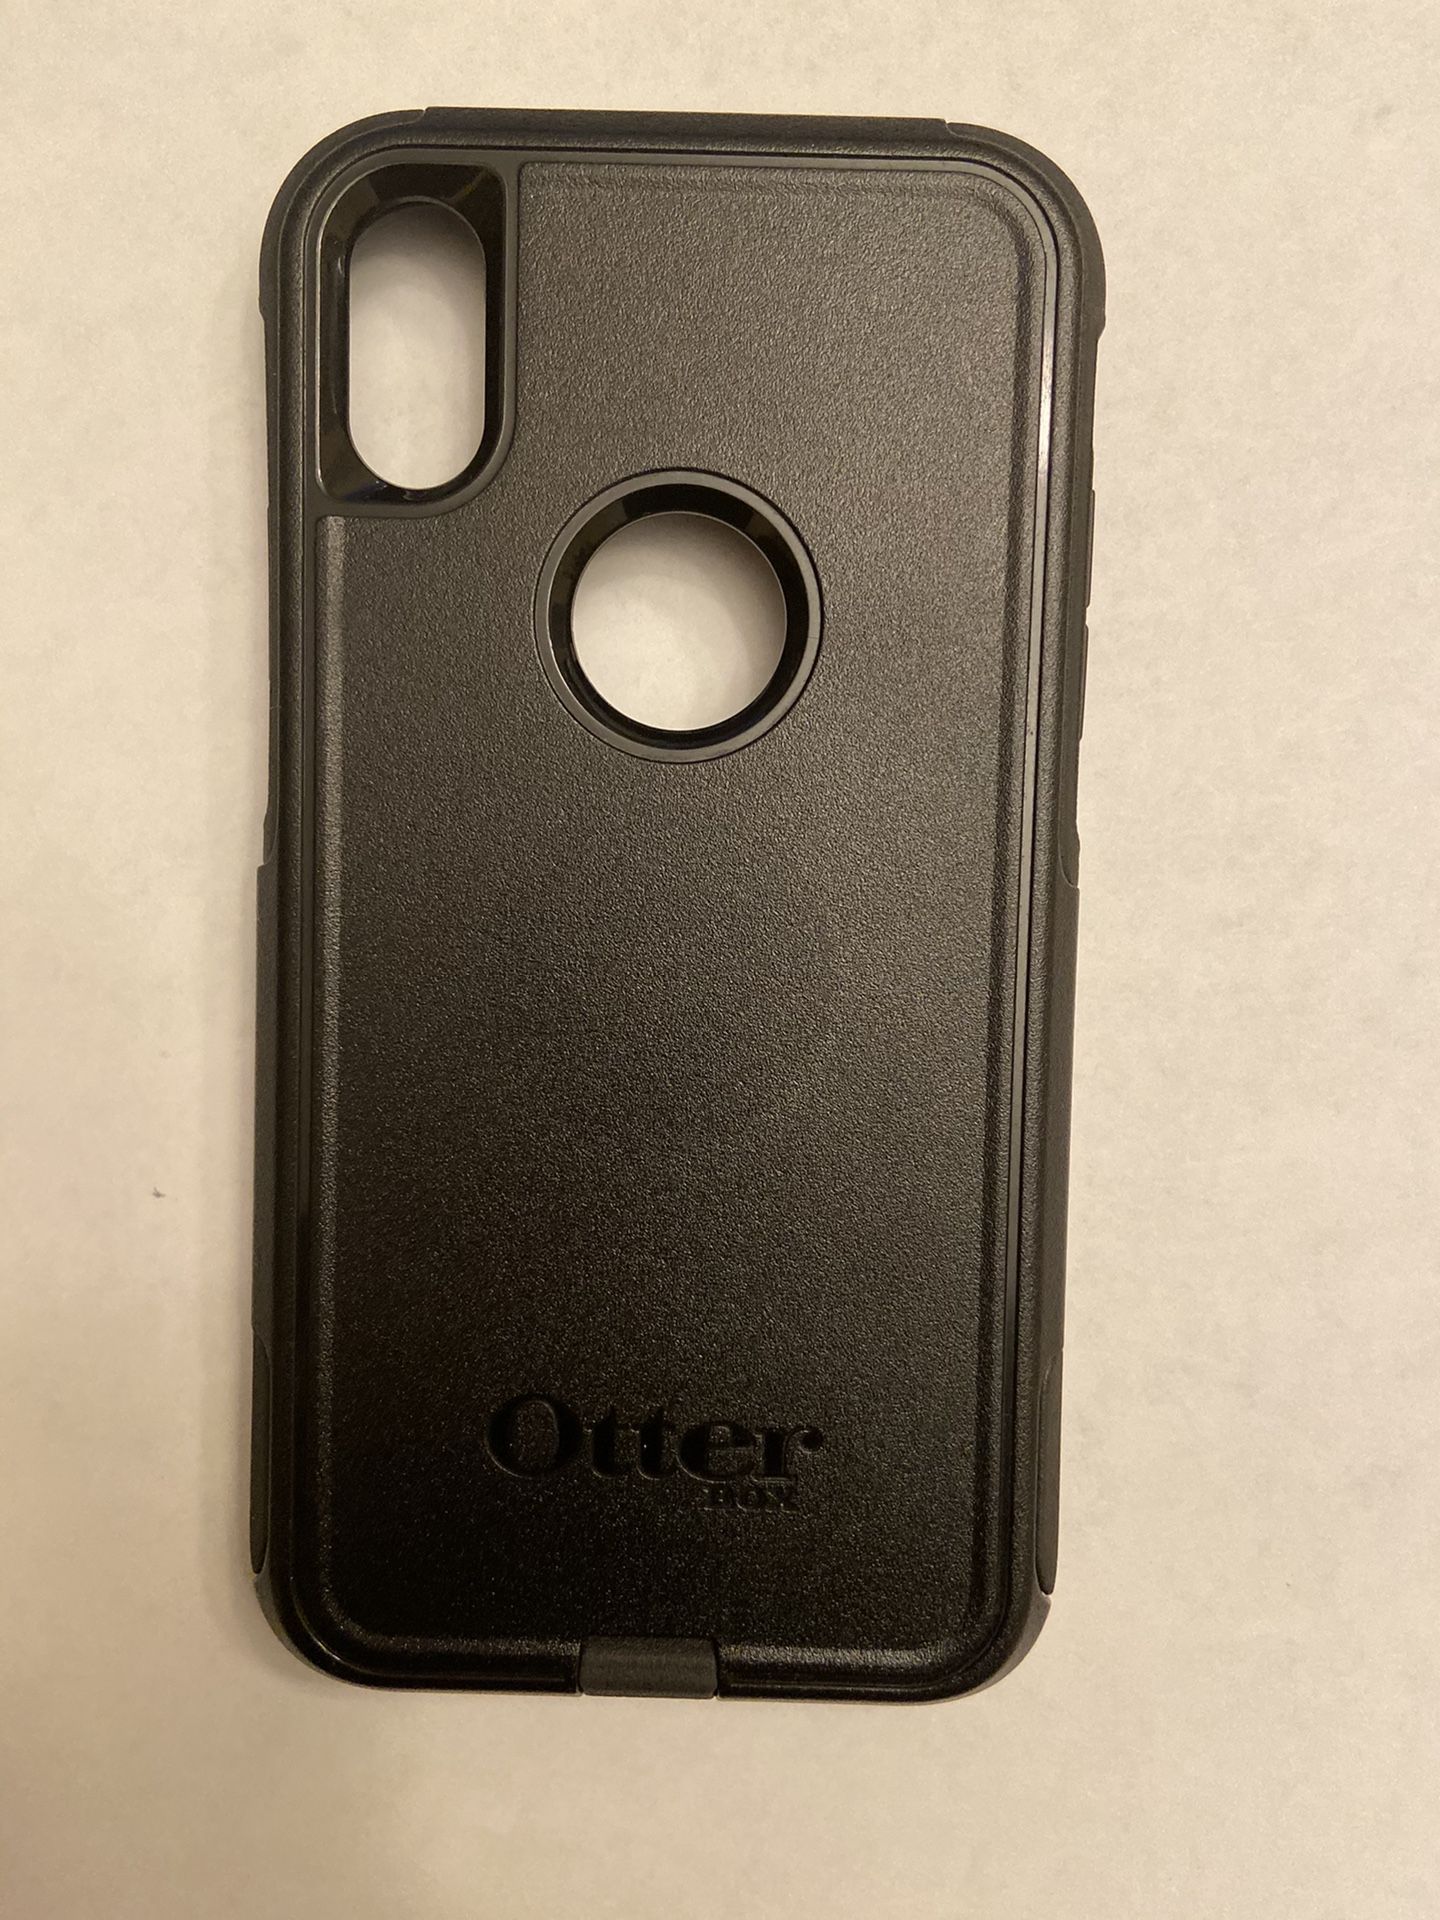 iPhone XR outter box